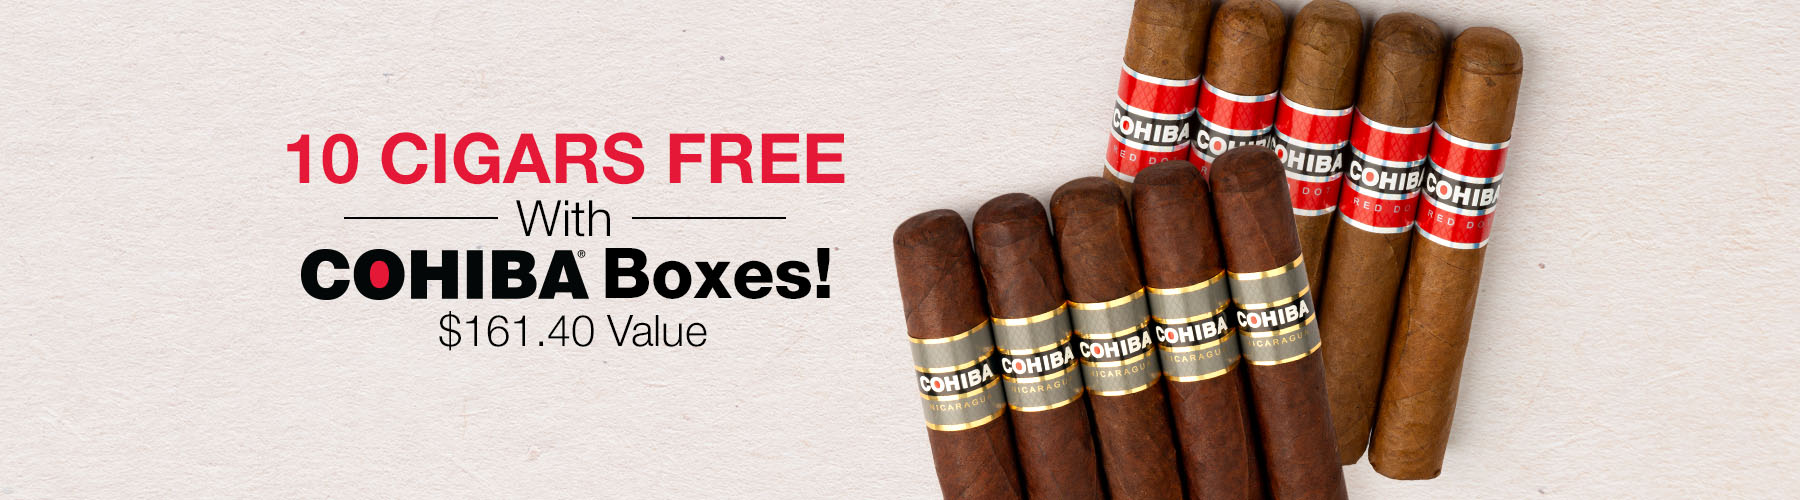 10 Cigars free with Cohiba boxes, valued at $161.40!